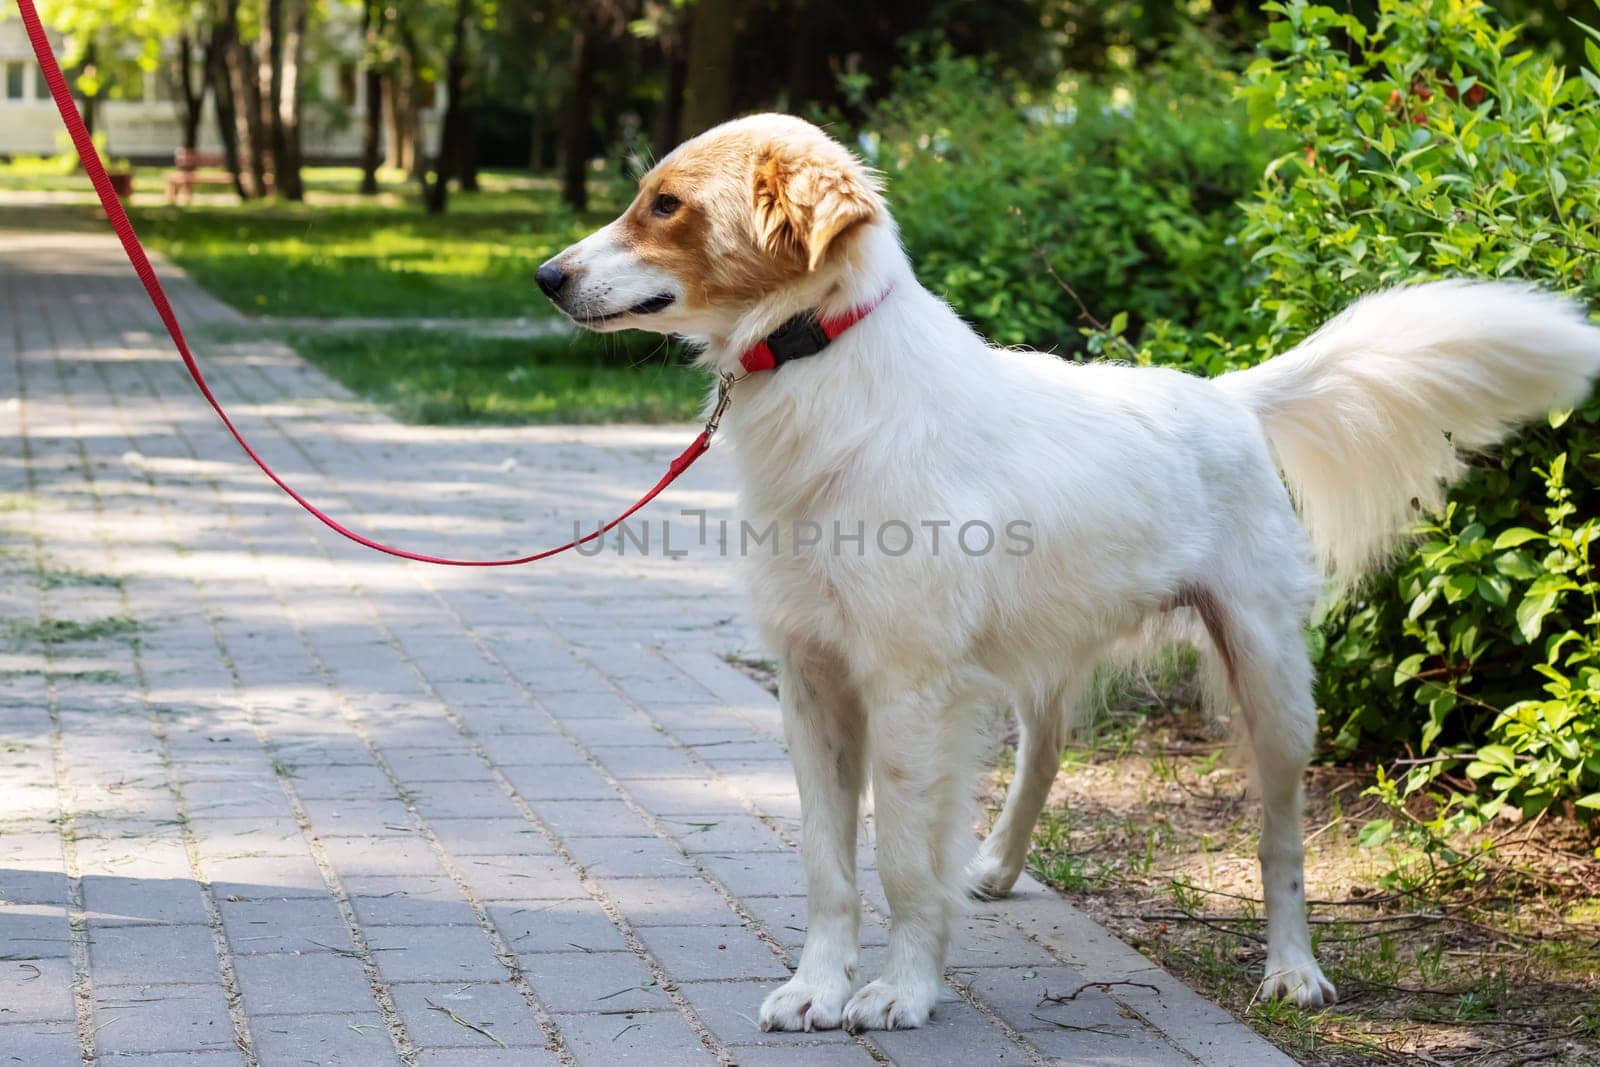 White fluffy dog walking in the park by Vera1703